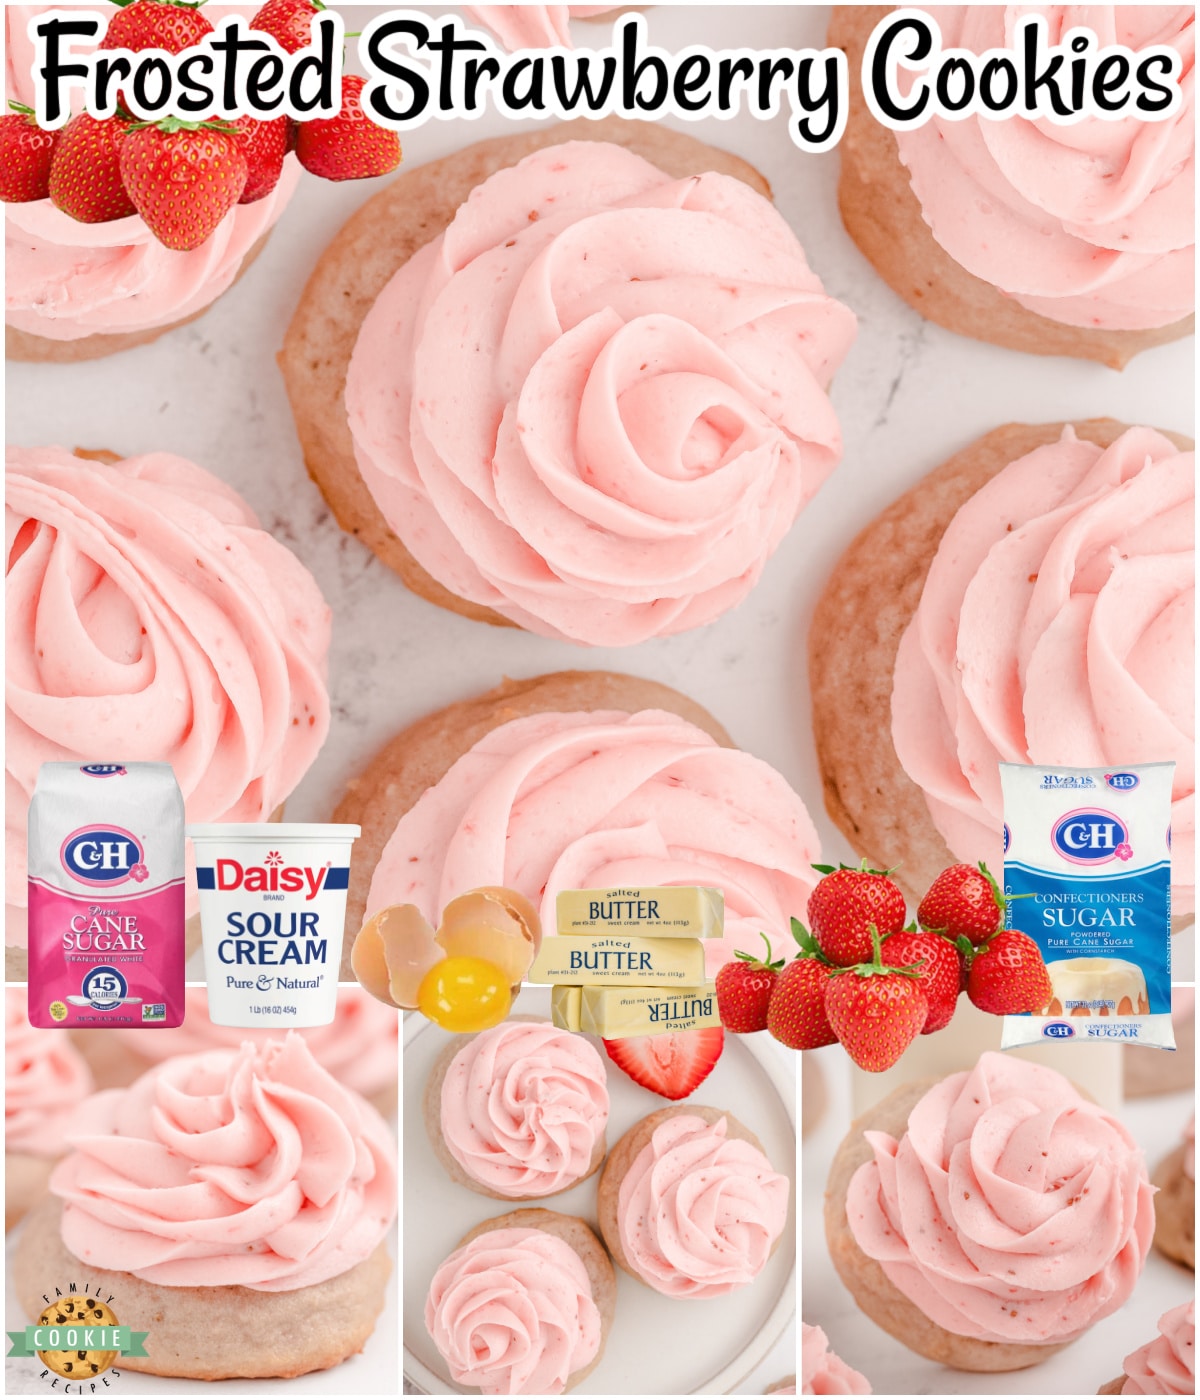 Frosted Strawberry Cookies made with fresh strawberry for that bright, fresh flavor that everyone adores! Soft, pillowy sugar cookies topped with a luscious strawberry buttercream you just have to try! 